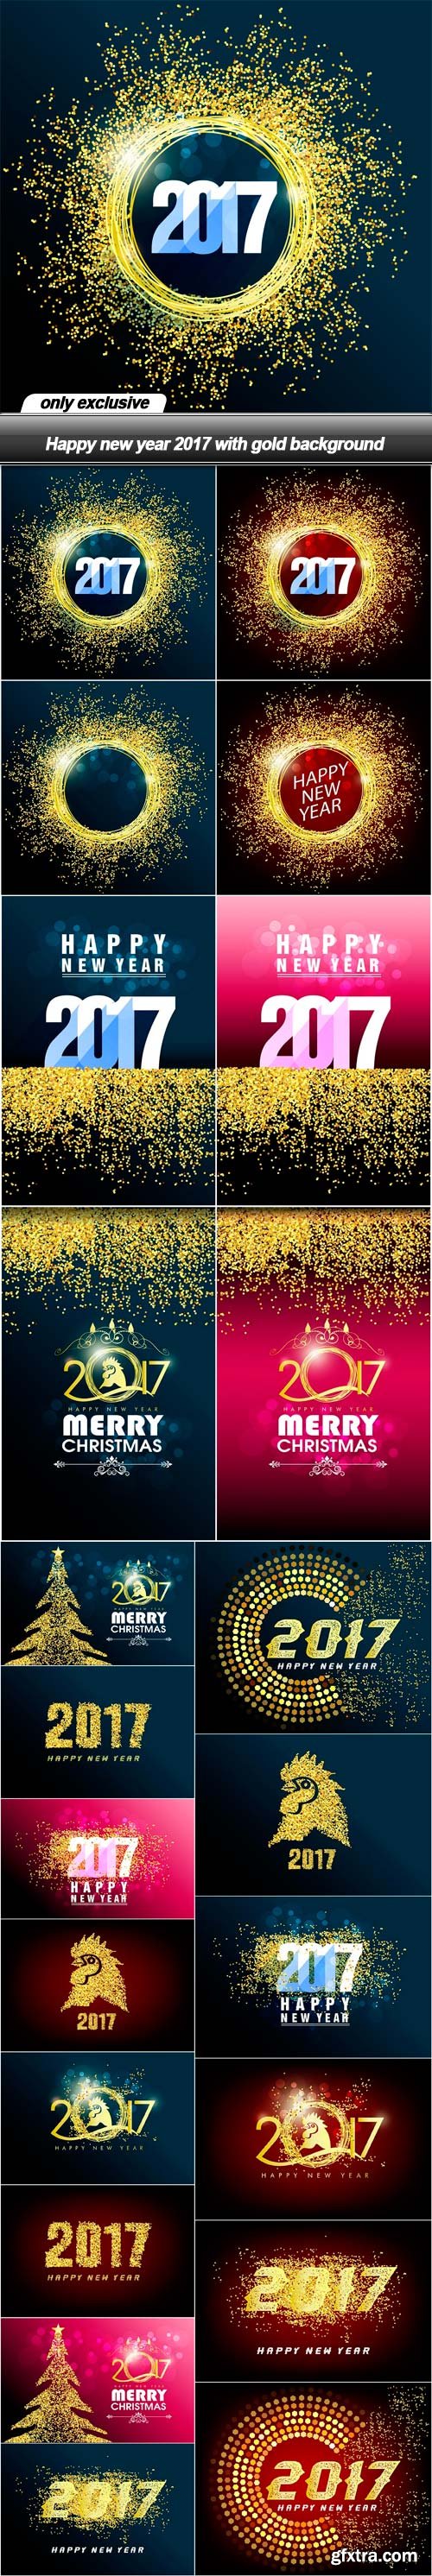 Happy new year 2017 with gold background - 22 EPS